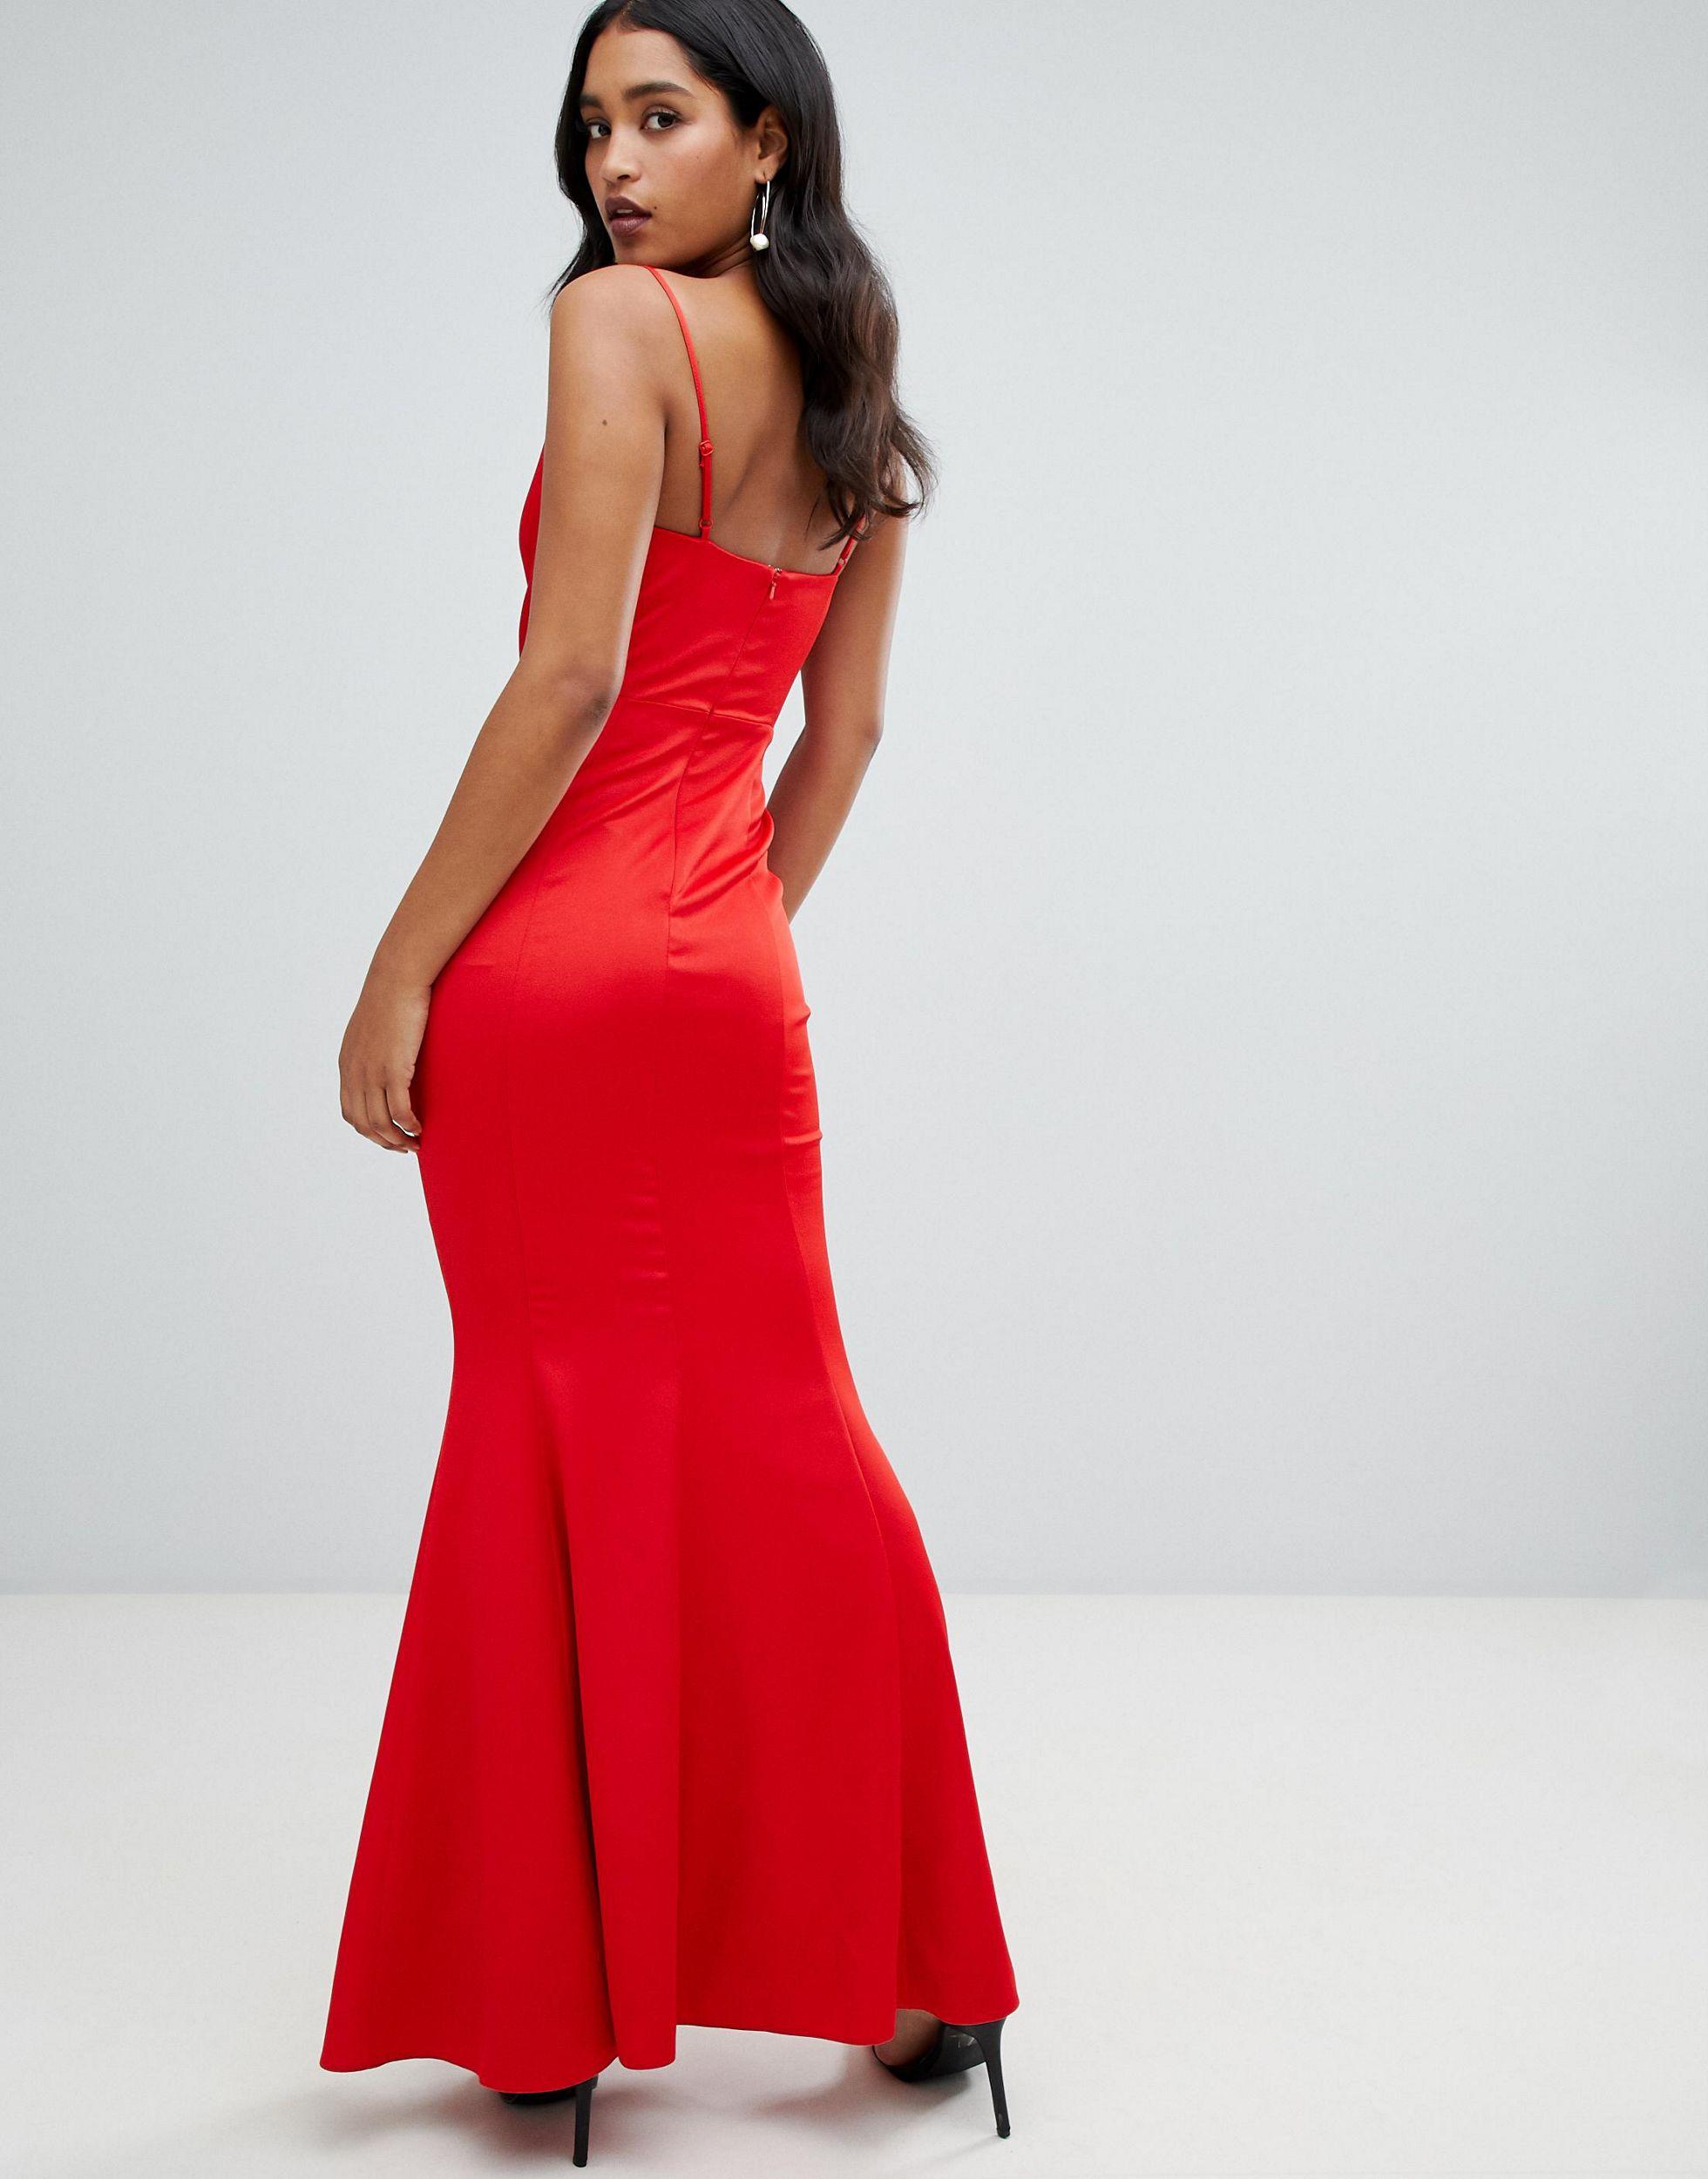 Lipsy Synthetic Cowl Neck Maxi Dress in ...